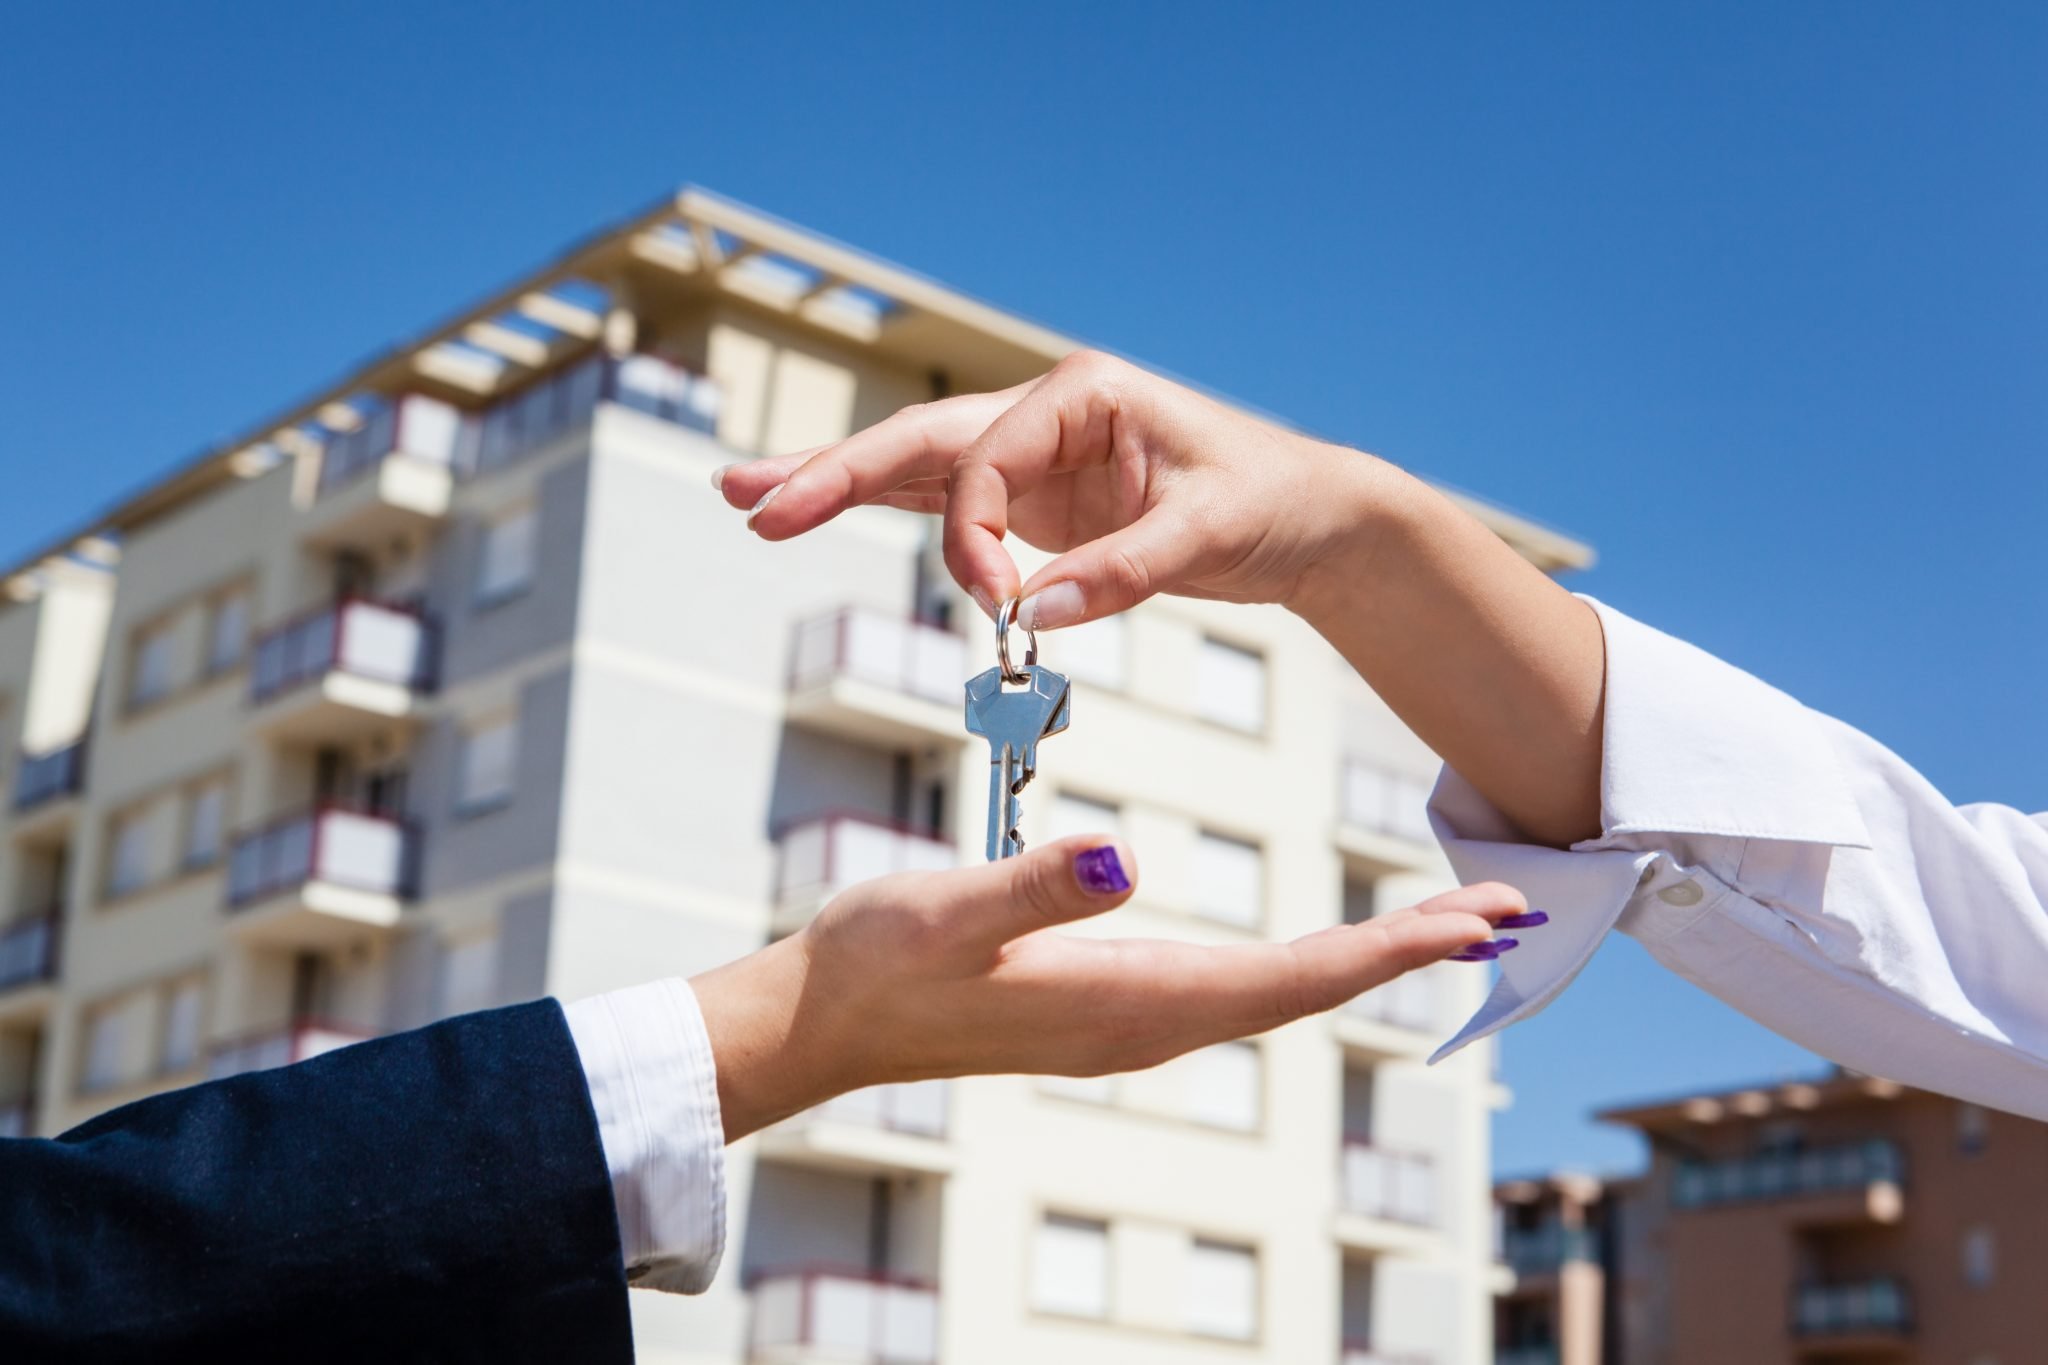 Tips for First-Time Landlords